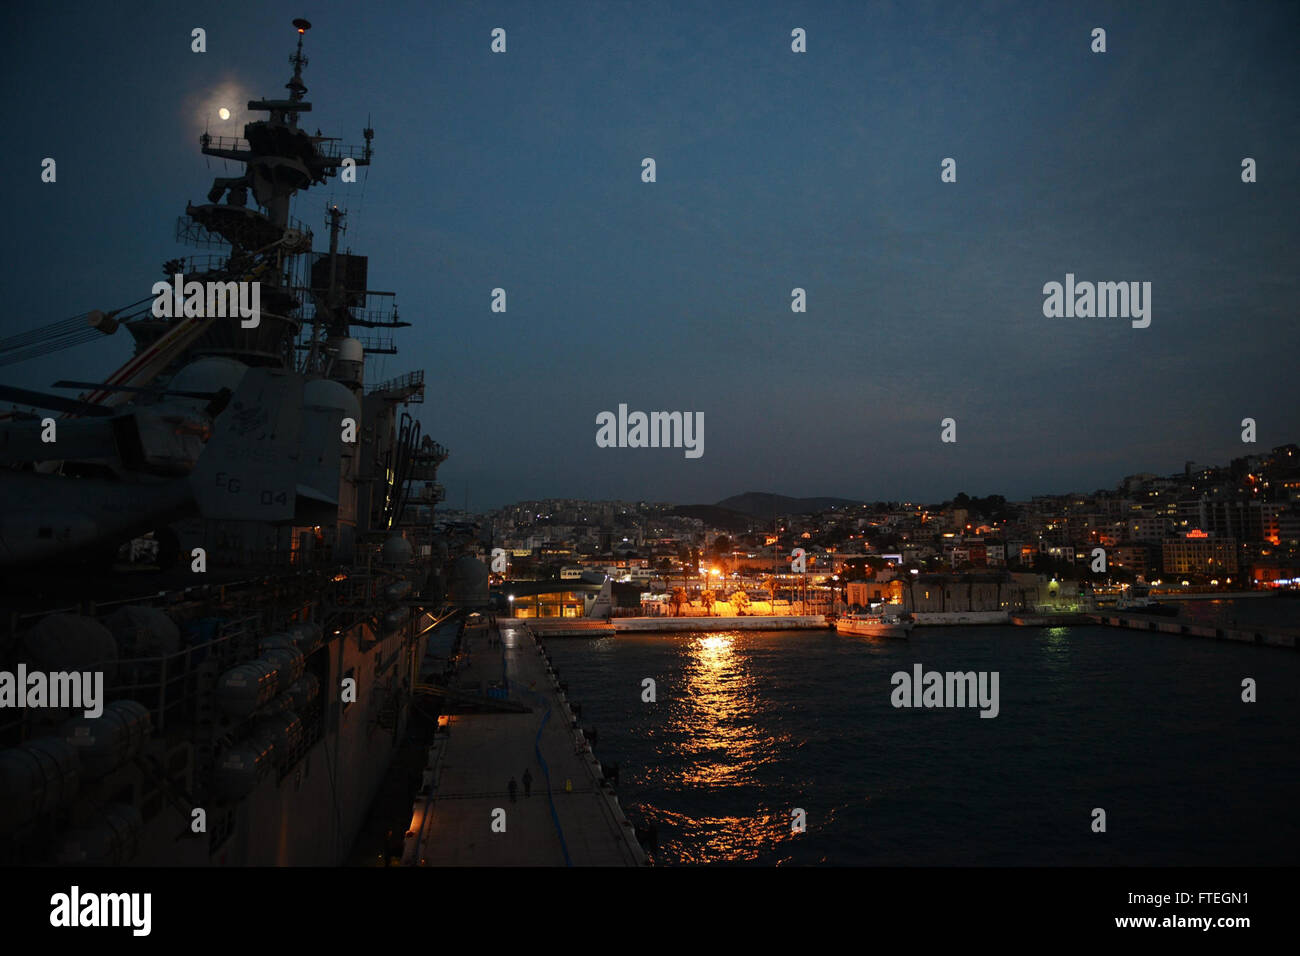 KUSADASI, Turkey (Oct. 5, 2014) The amphibious assault ship USS Bataan (LHD 5) sits pier side during a port call in Kusadasi, Turkey. The Bataan Amphibious Ready Group is on a scheduled deployment supporting maritime security operations, providing crisis response capability and theater security cooperation efforts in the U.S. 6th Fleet area of operations. Stock Photo